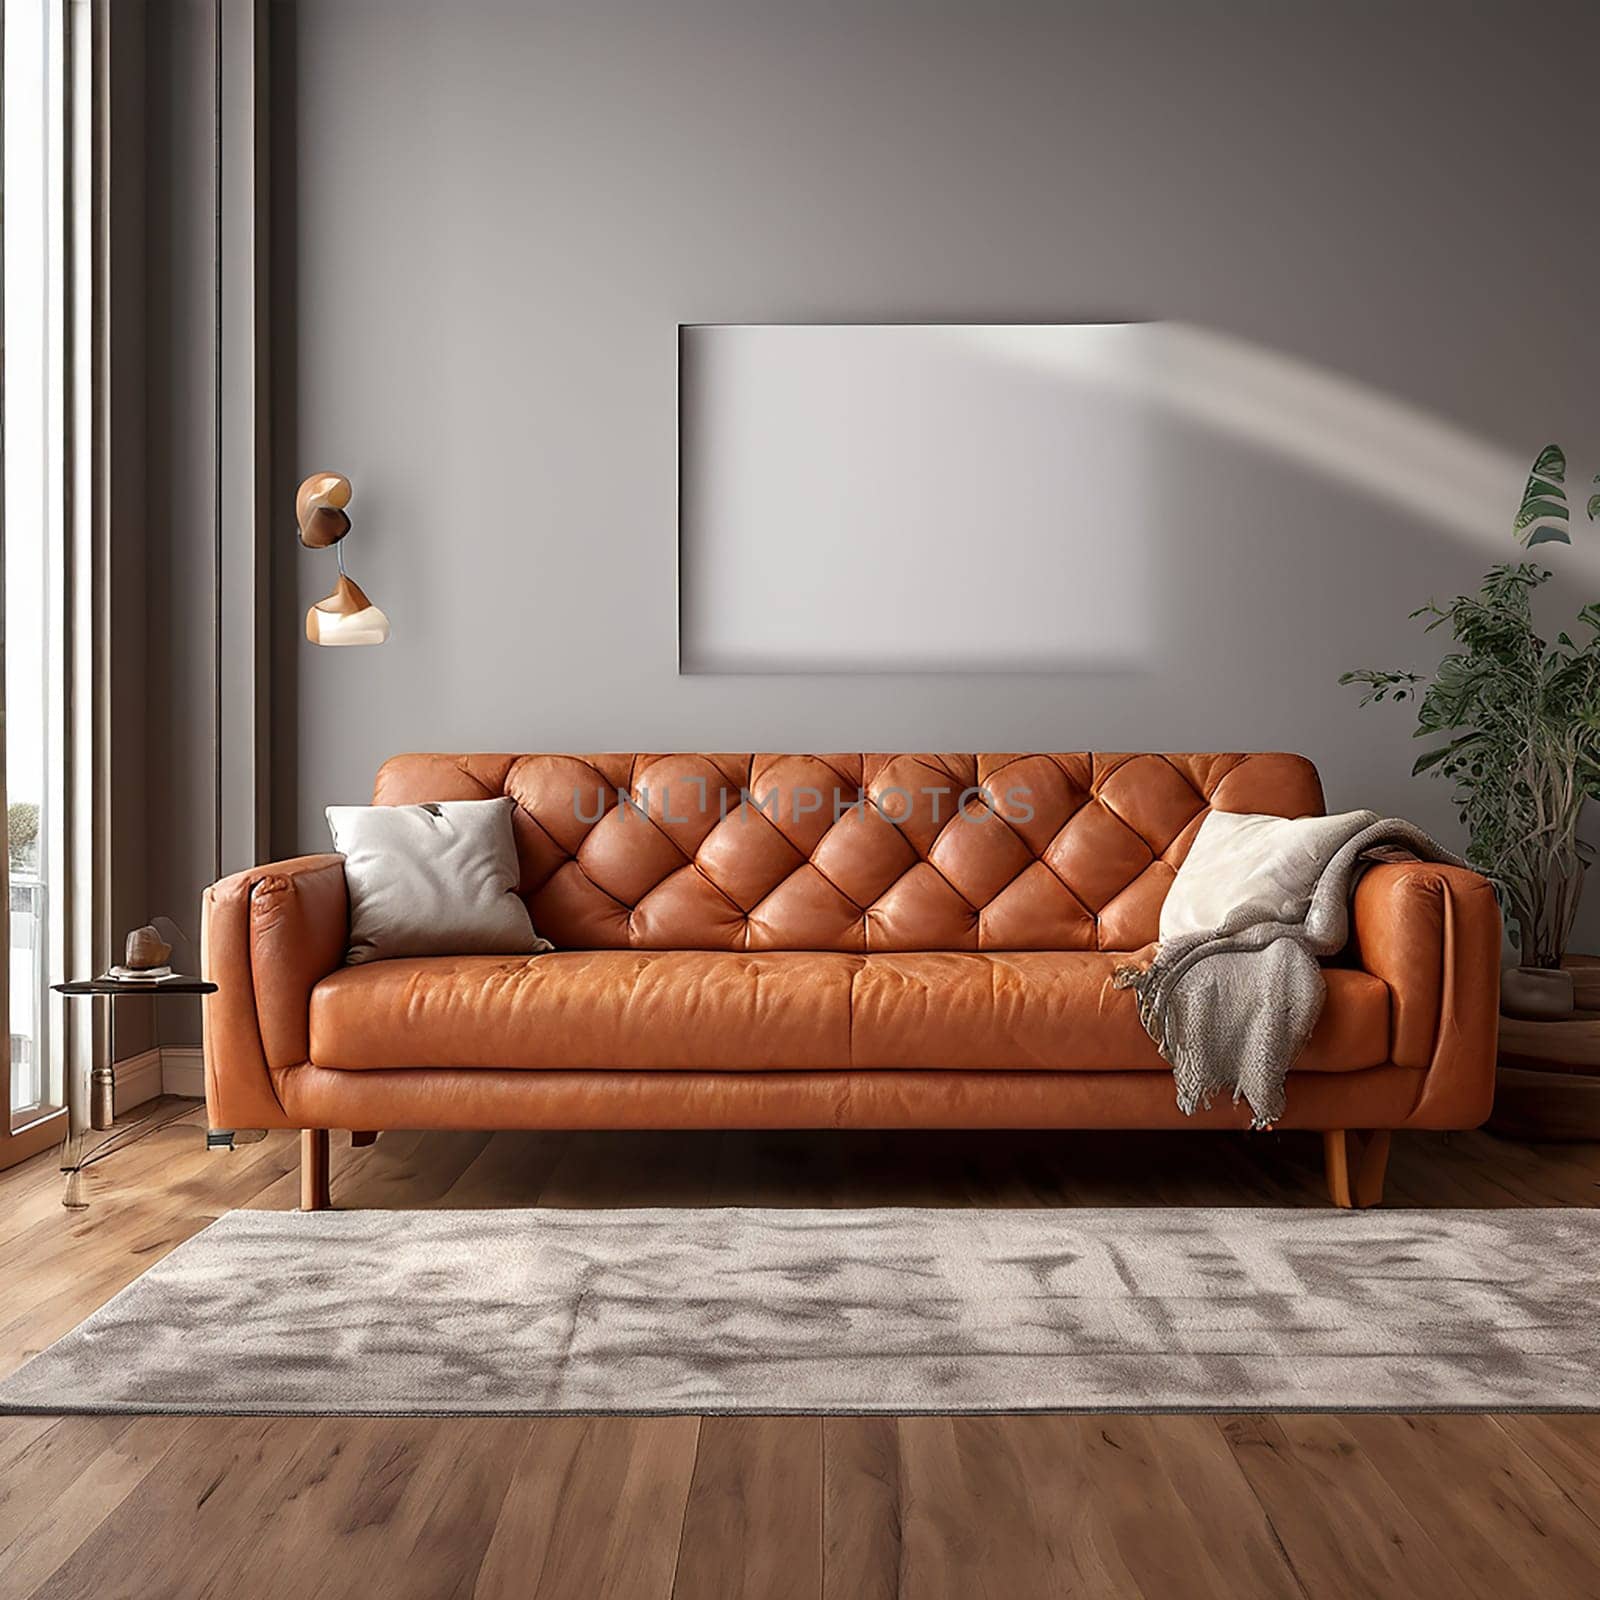 Living Room Comfort: Embracing Relaxation with a Sofa and Copy Space by Petrichor